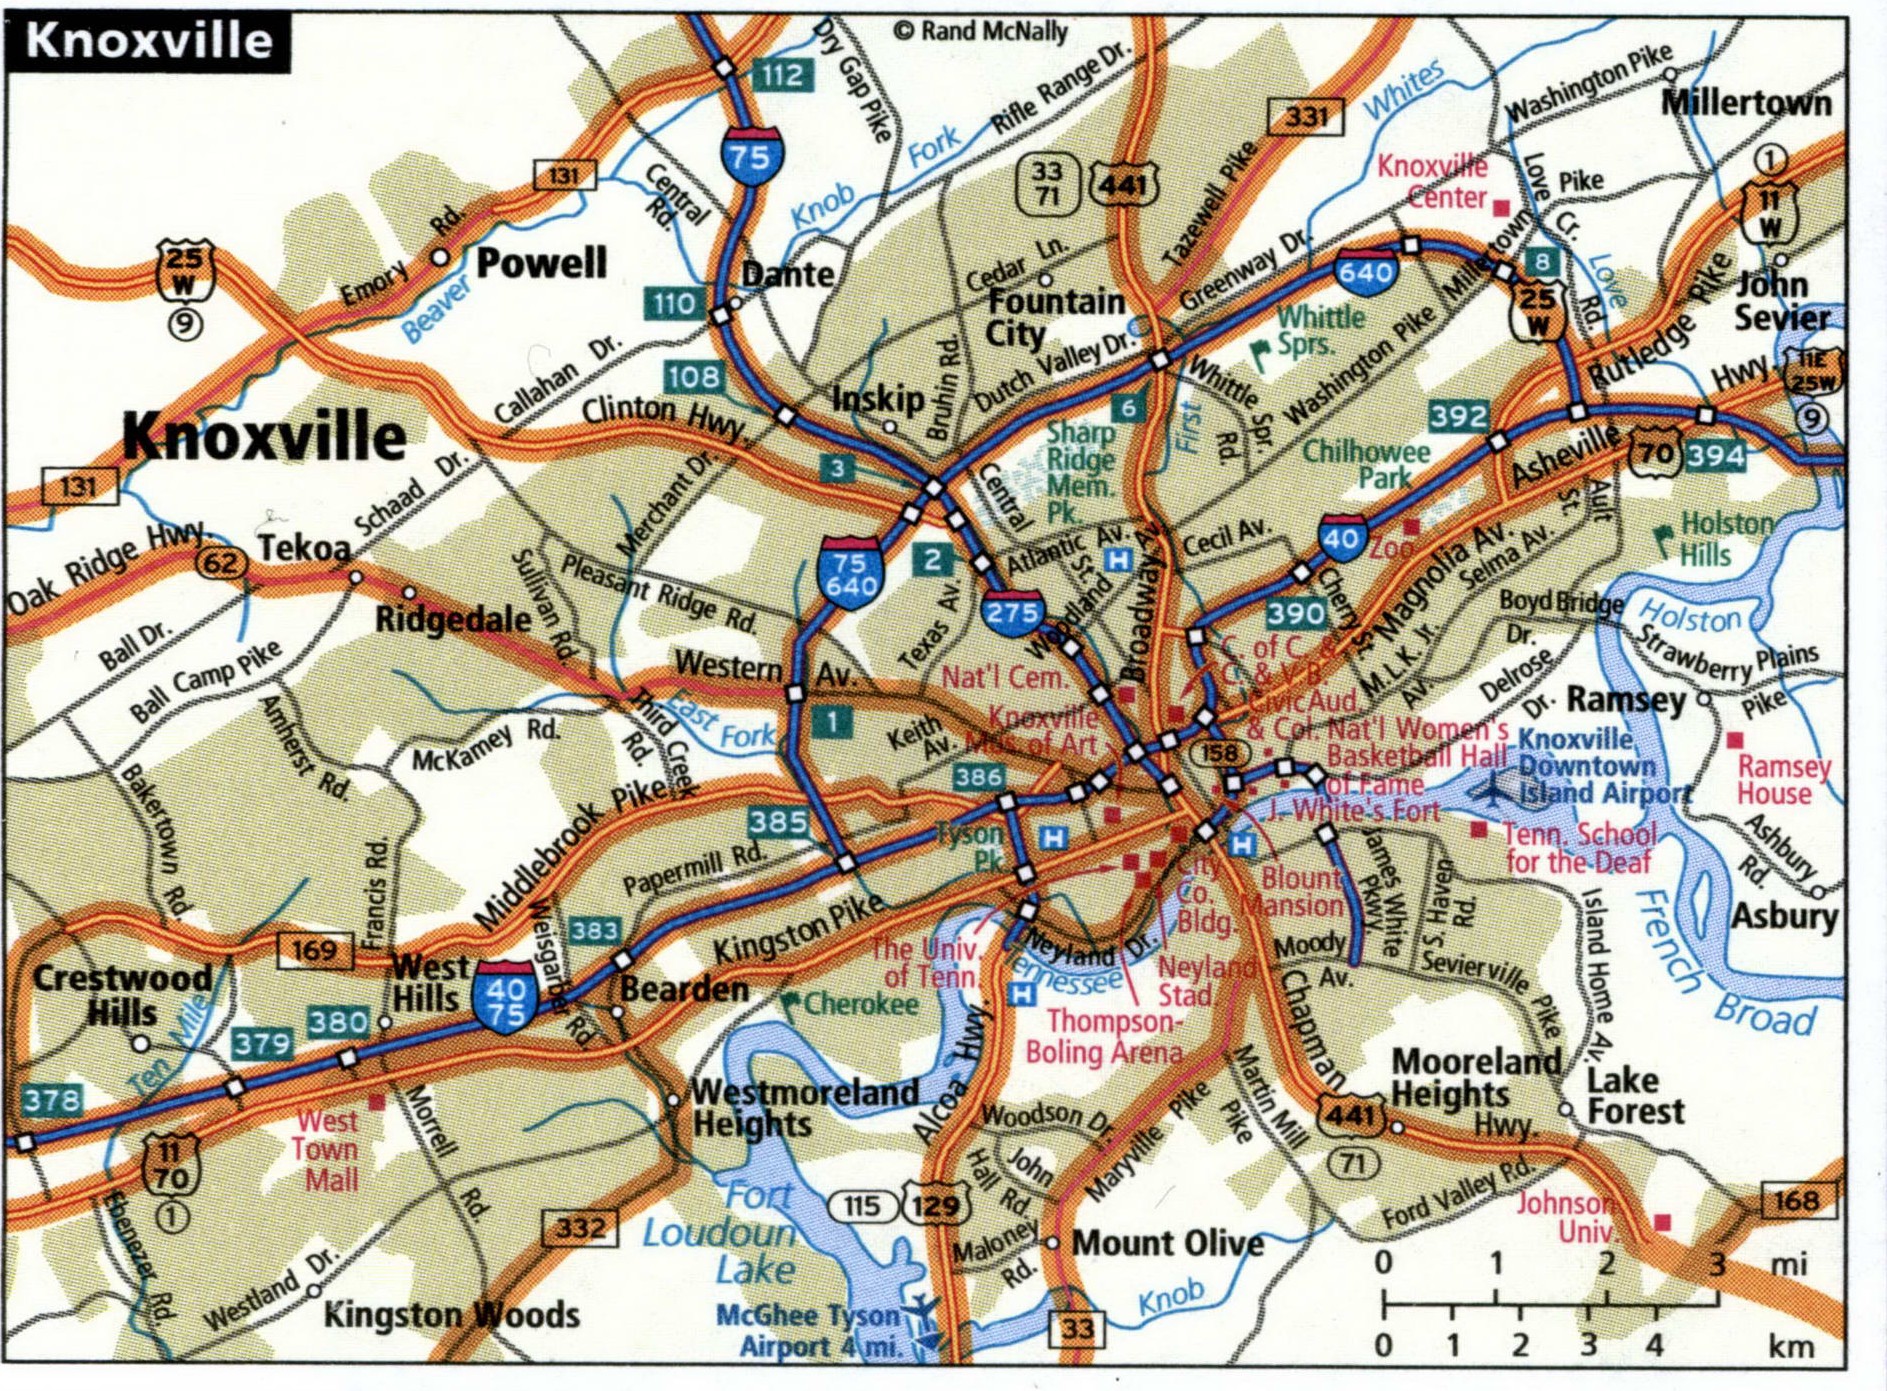 Knoxville city map for truckers